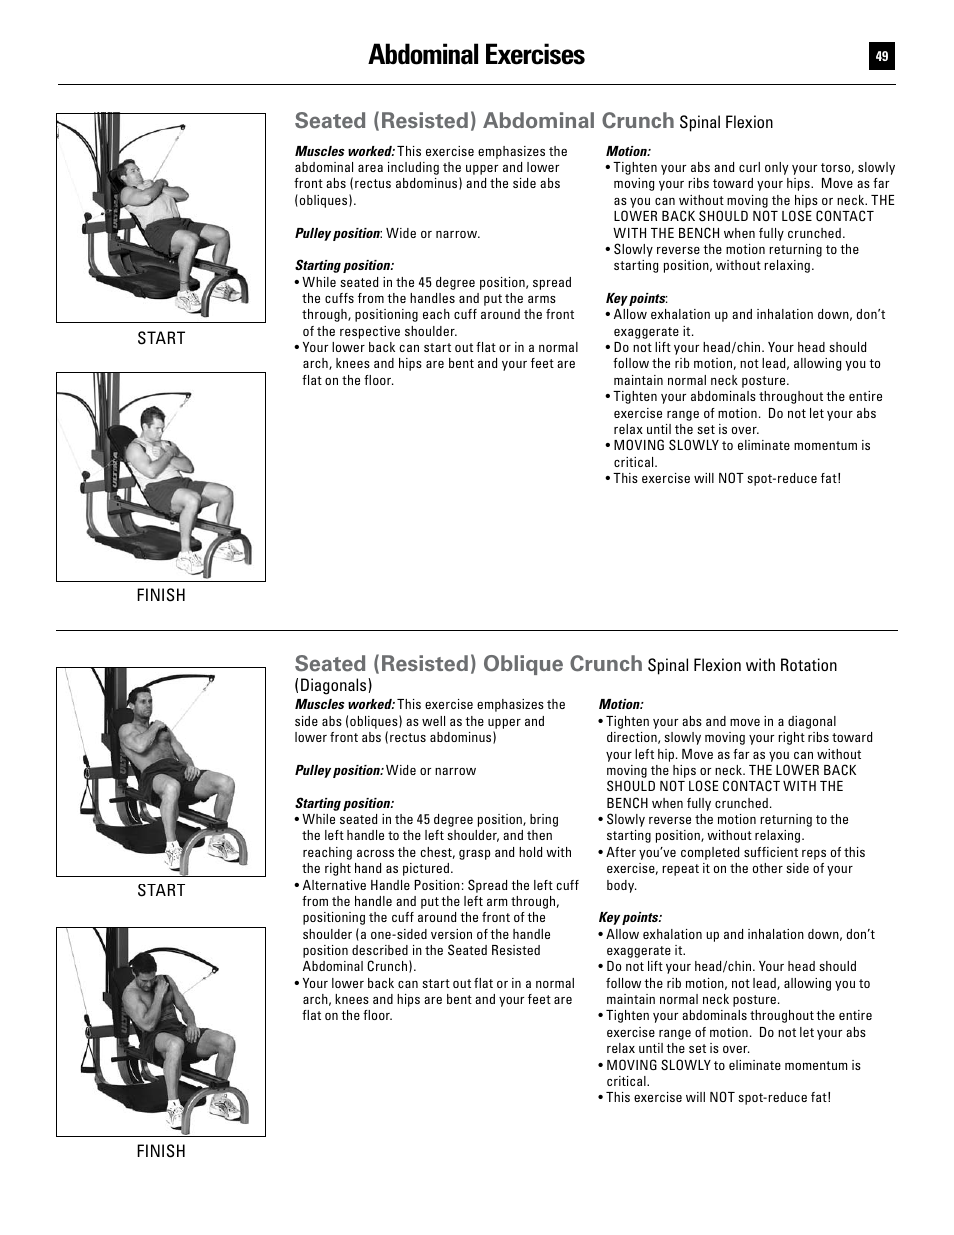 Abdominal exercises, Seated (resisted) abdominal crunch, Seated (resisted) oblique crunch | Bowflex Ultimate User Manual | Page 49 / 110